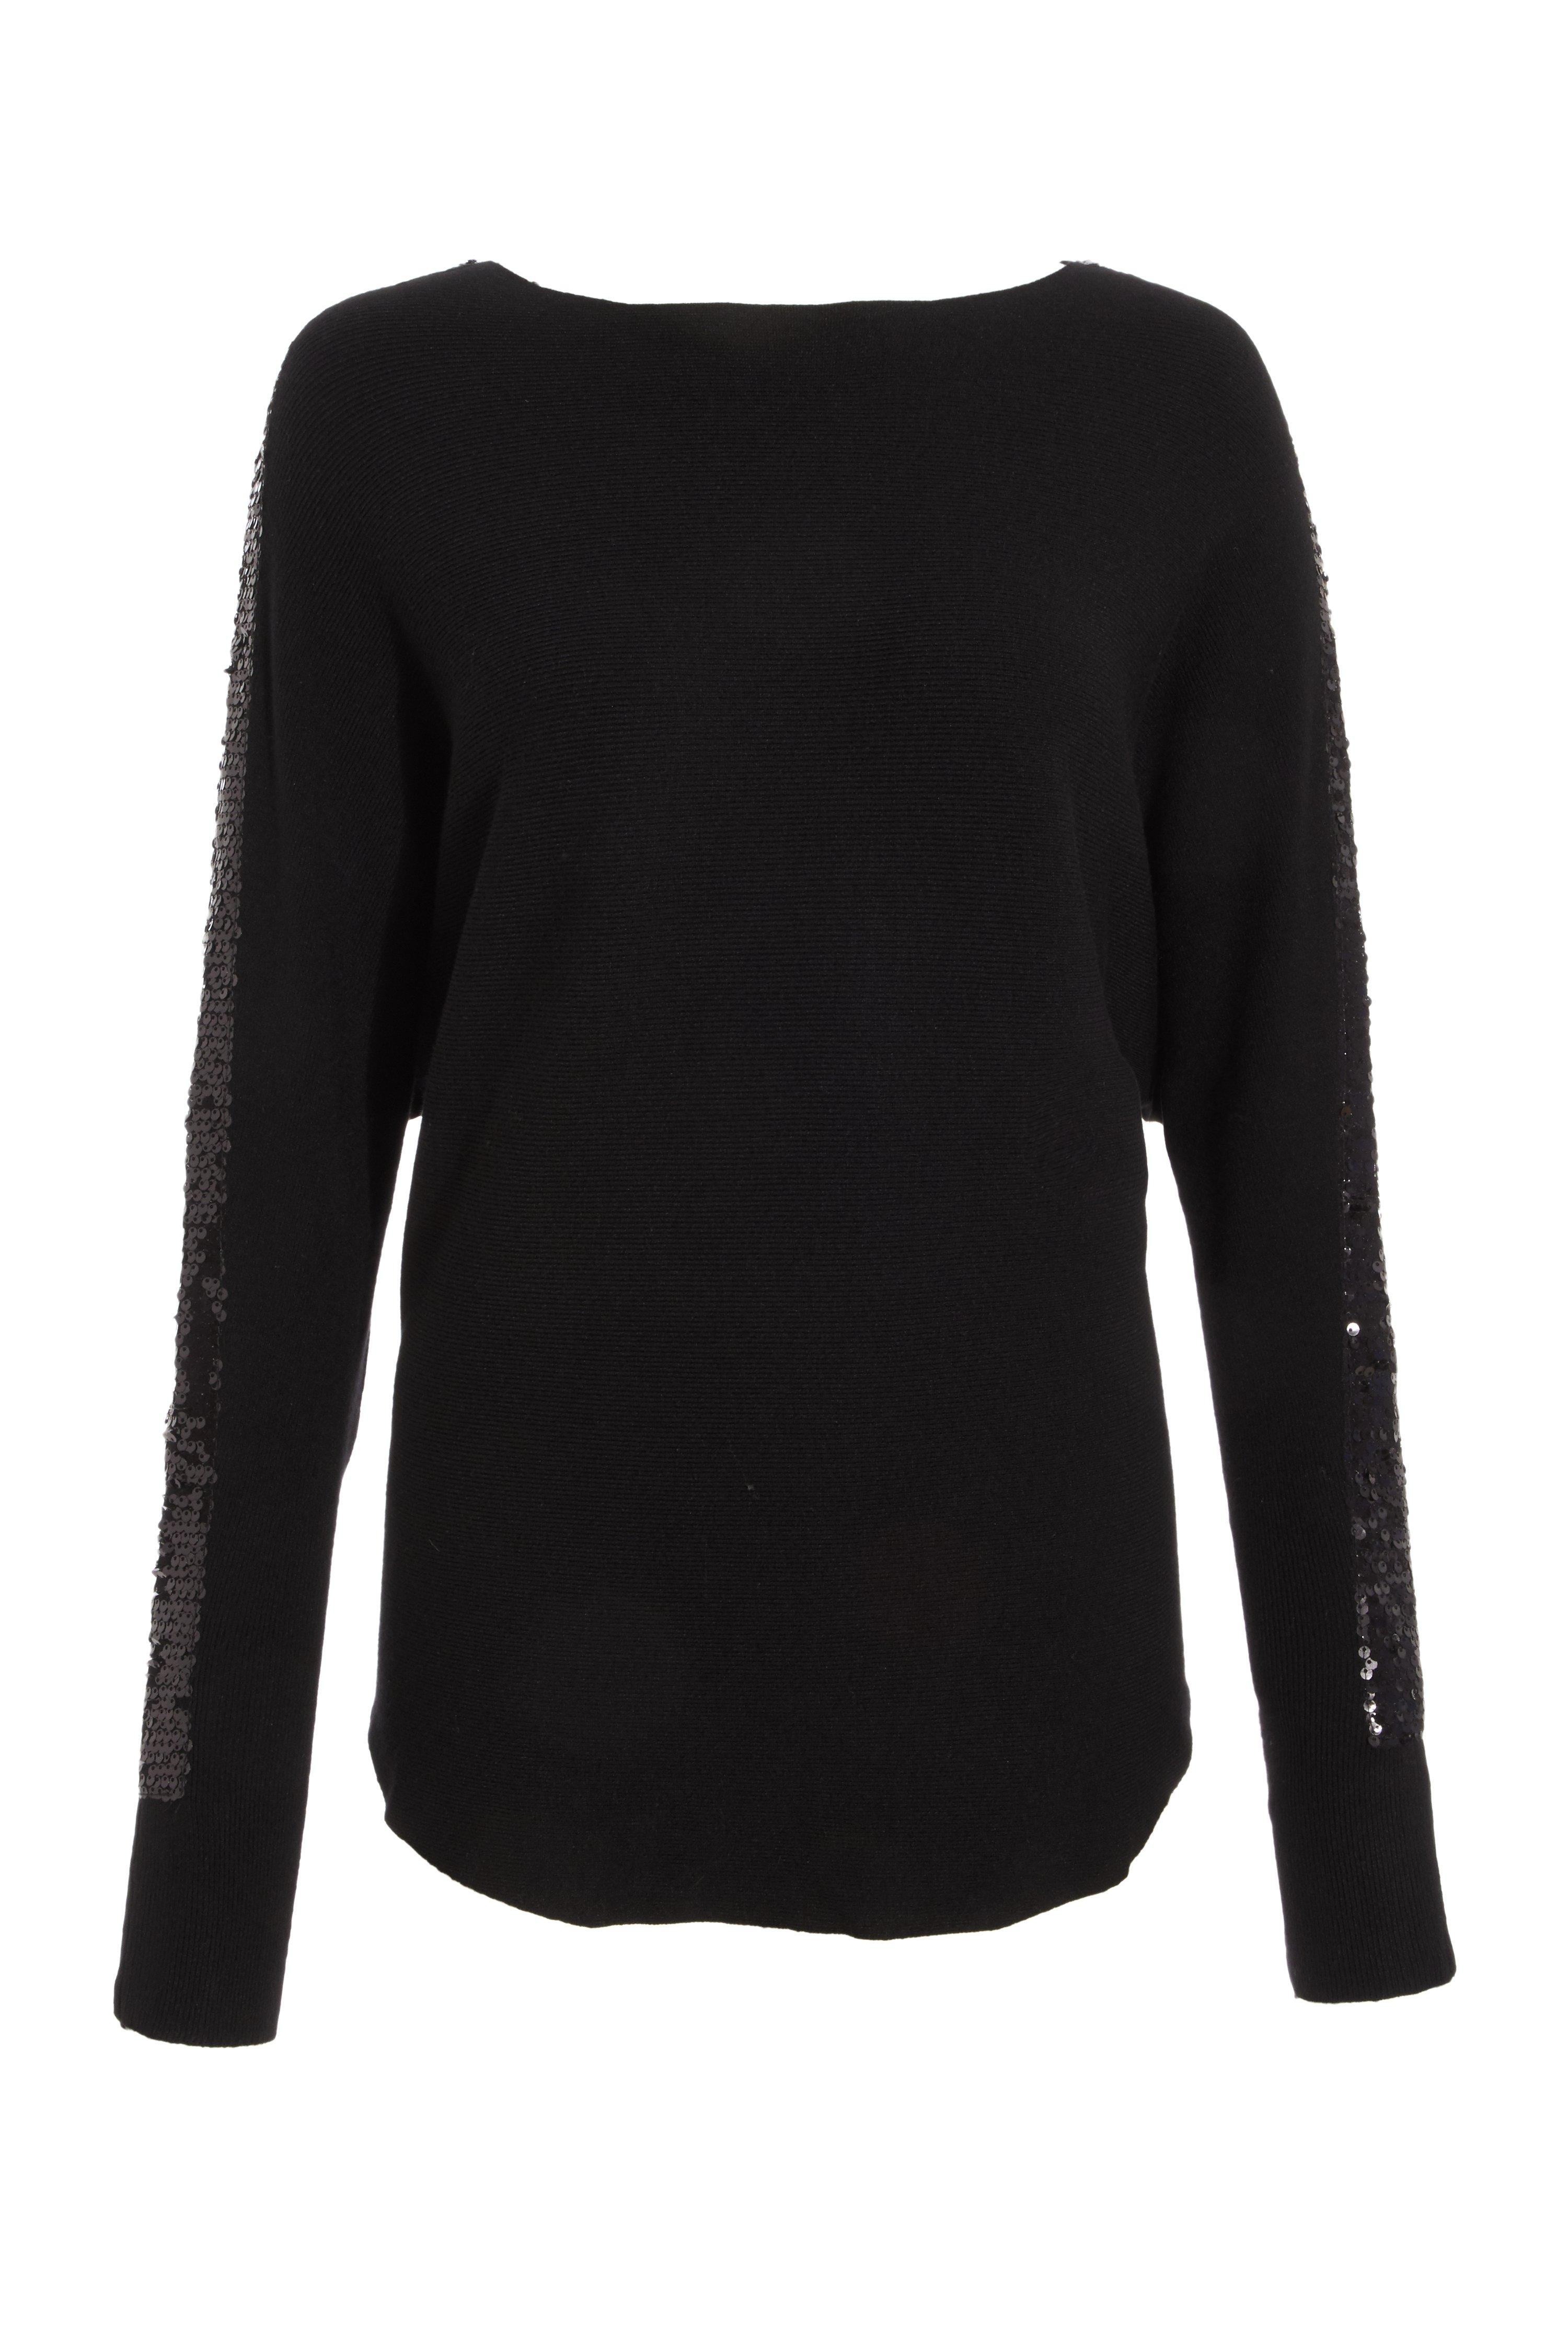 Black Sequin Stripe Knitted Jumper - Quiz Clothing